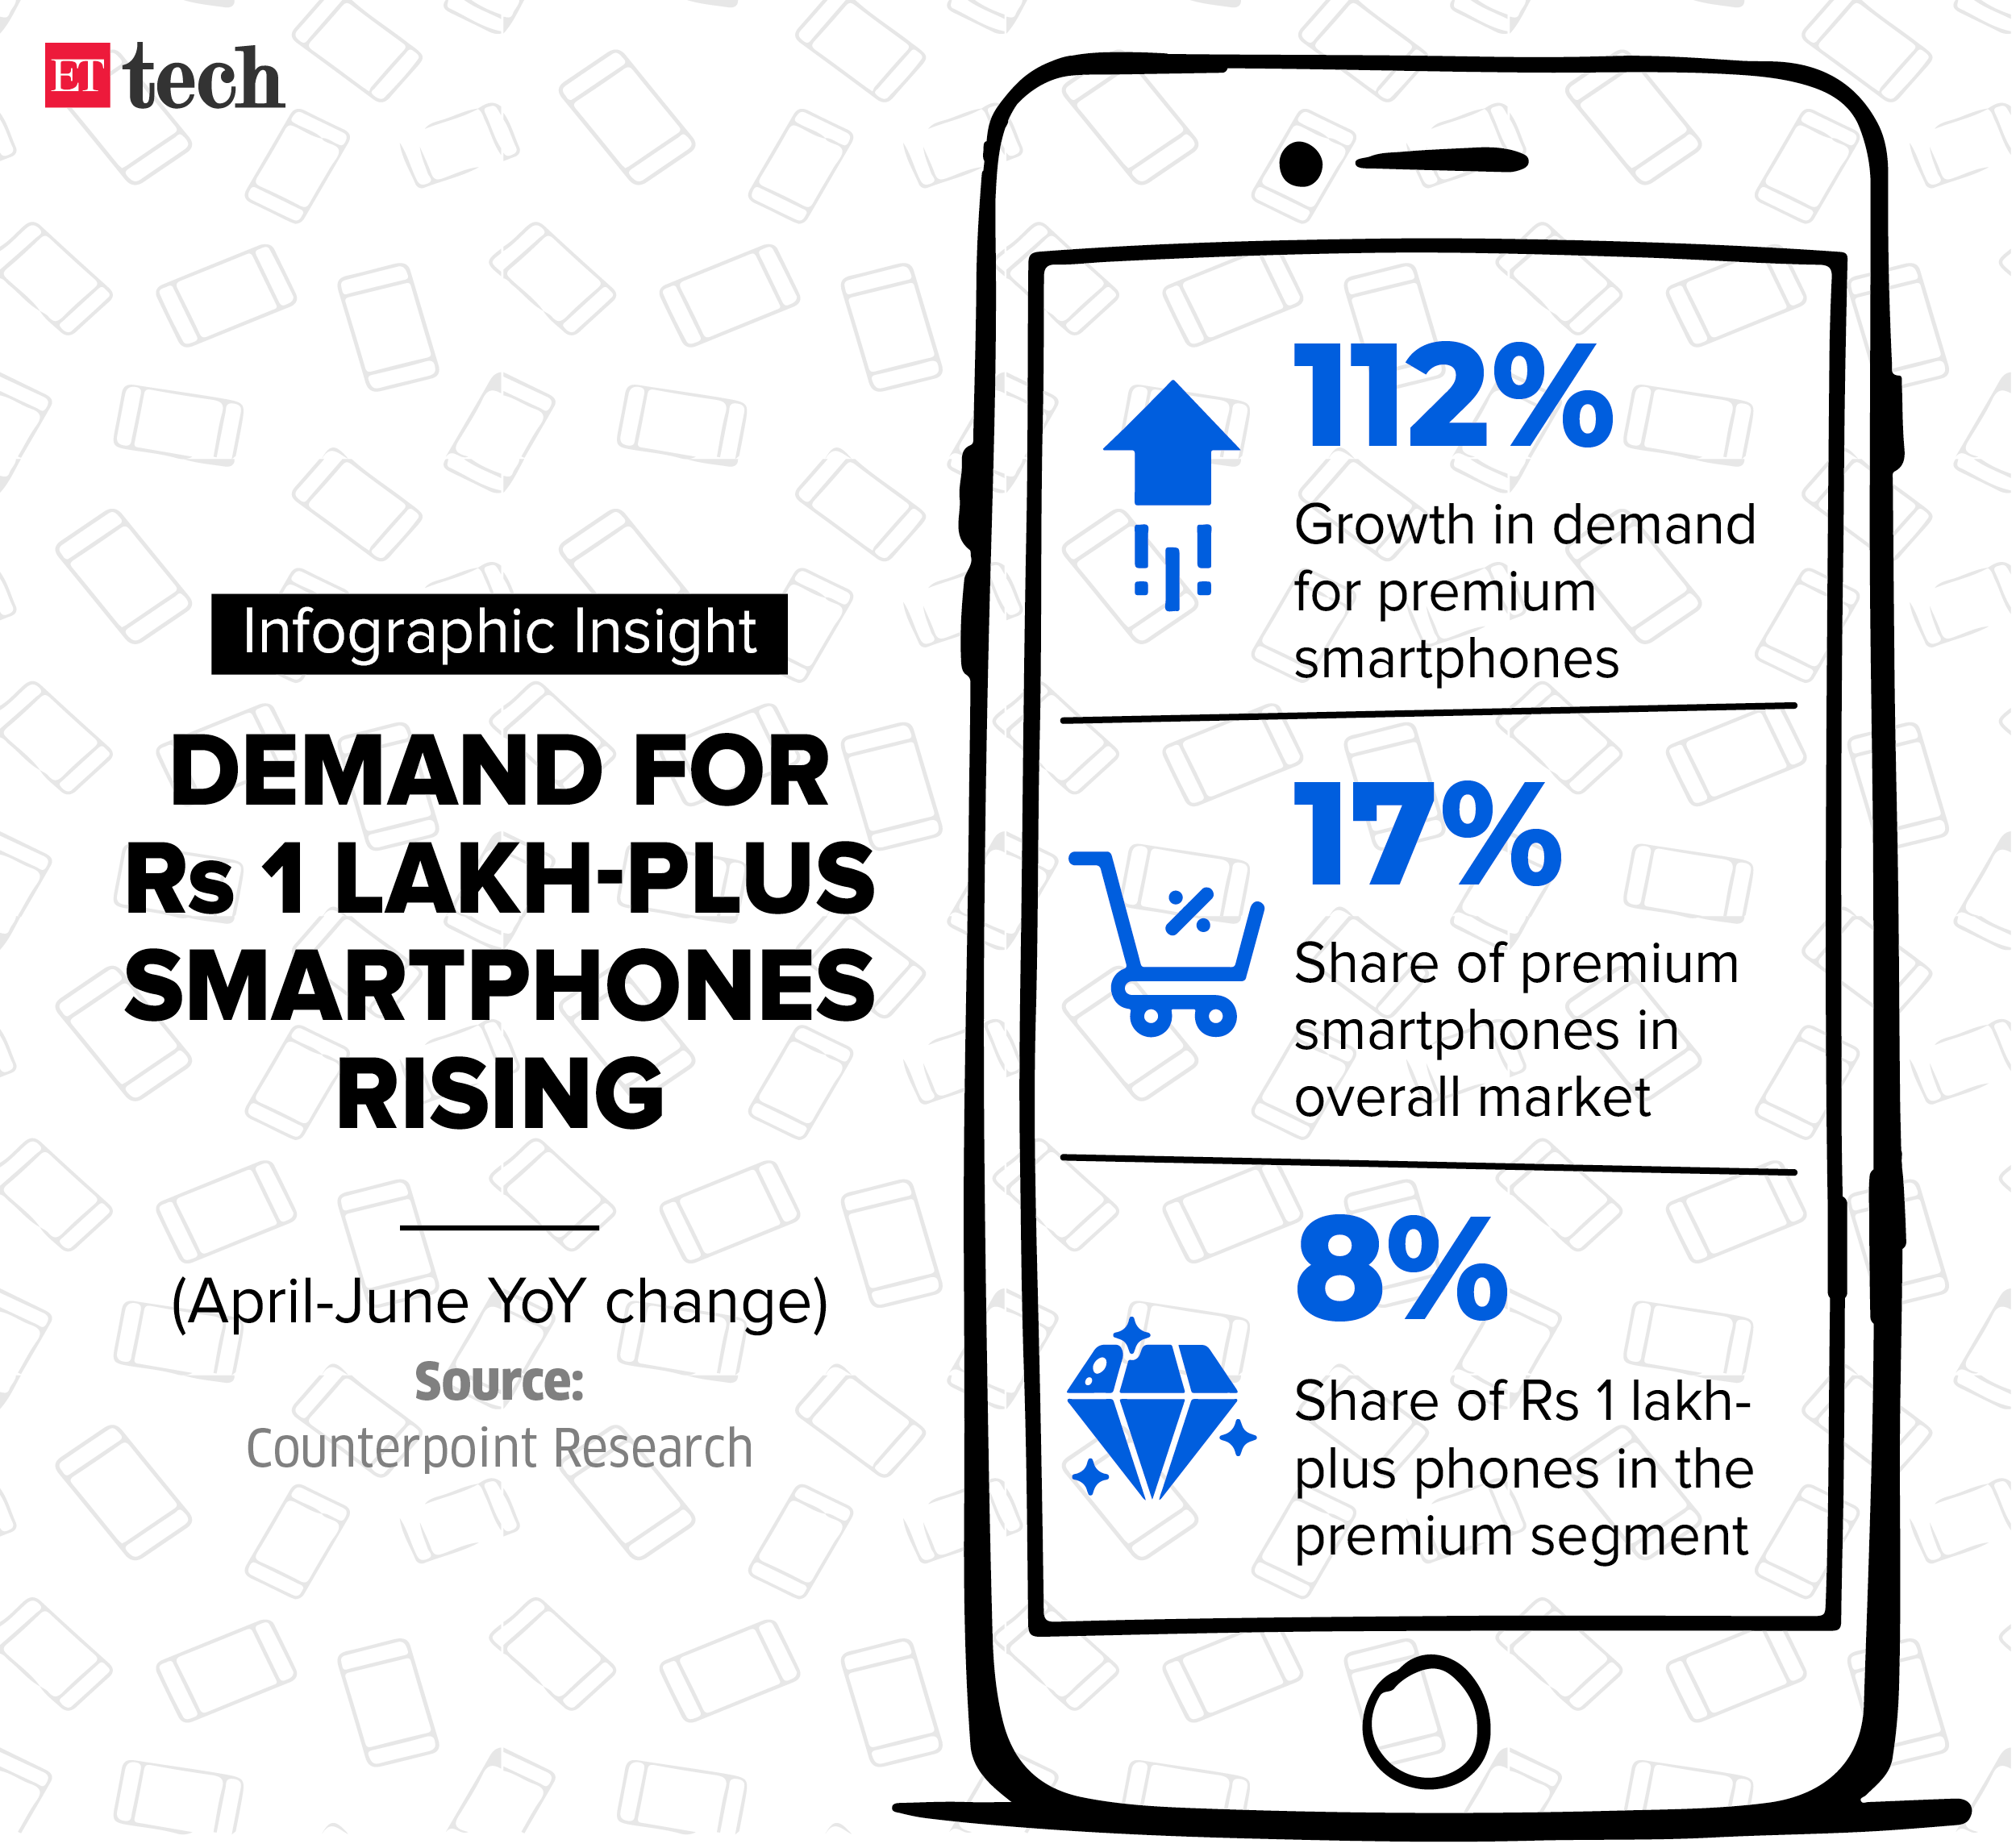 Infographic Insight Demand for Rs 1 lakh plus smartphones final